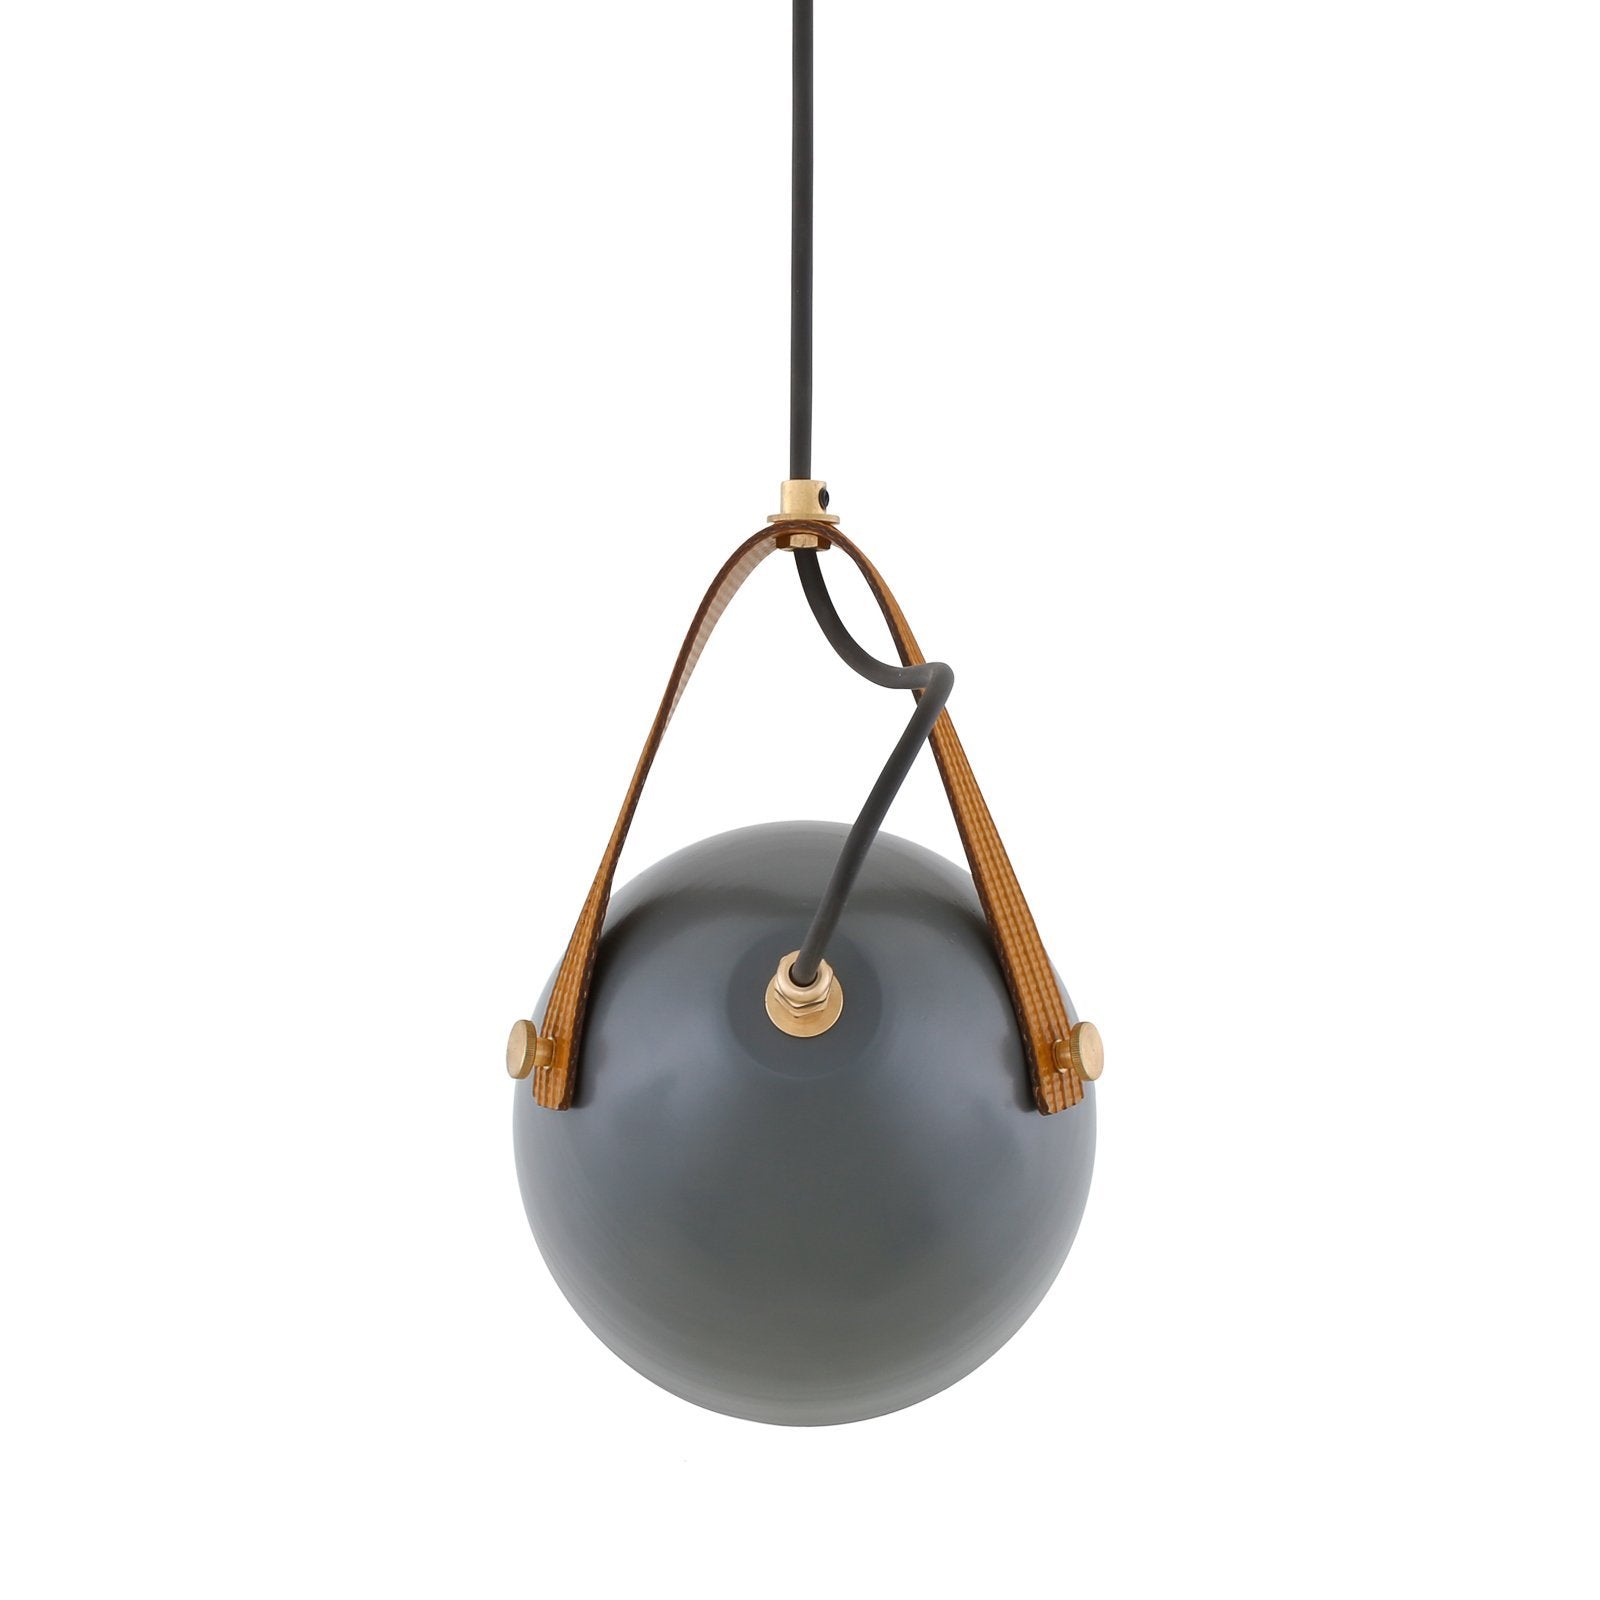 Lambeth Pendant with Rescued Fire-Hose Strap IP65 - Pendant Lights from RETROLIGHT. Made by Mullan Lighting.